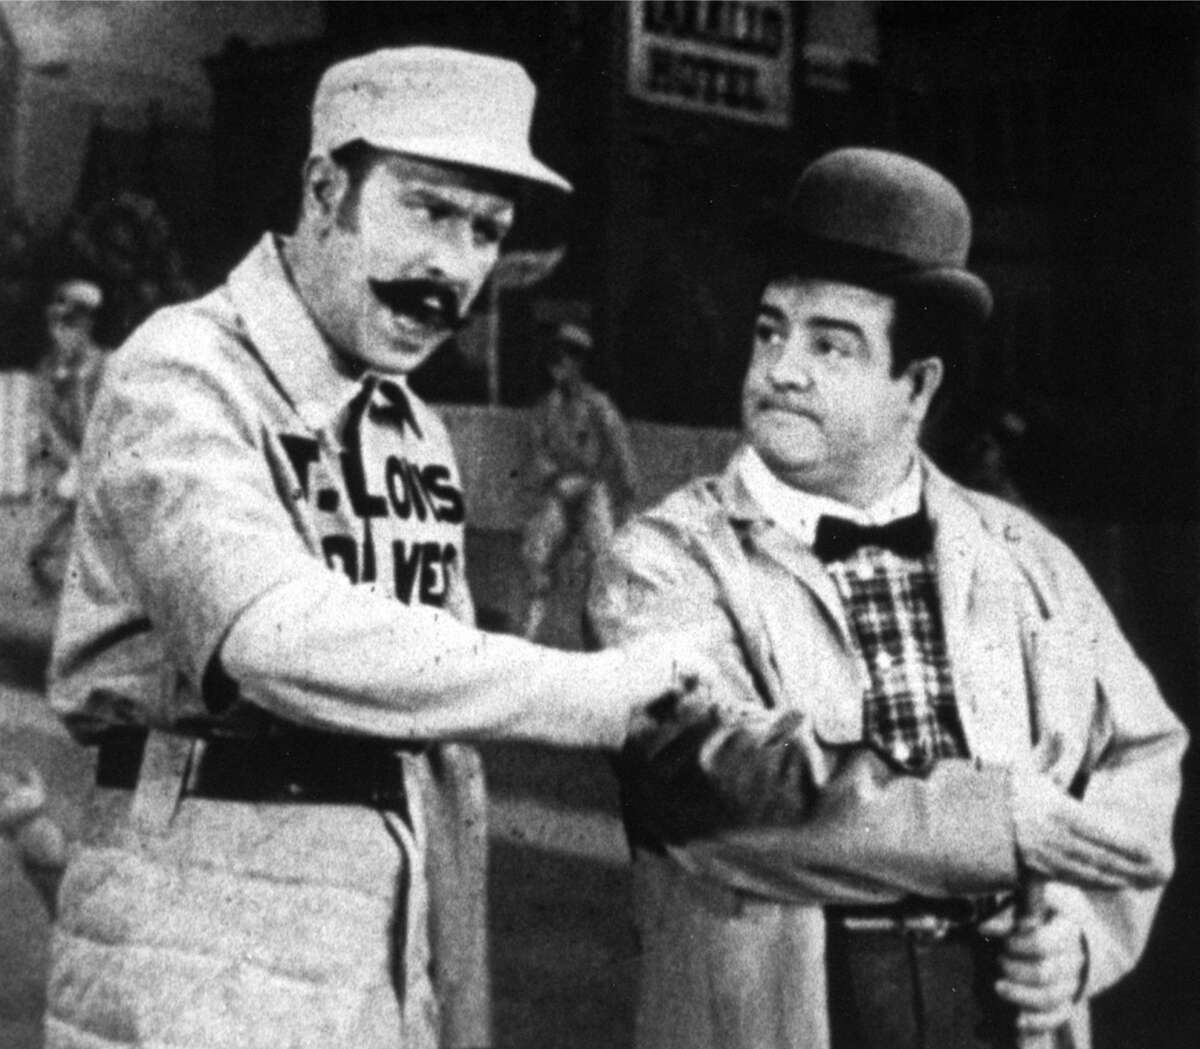 The Old Time Radio Show will present of the comedic duo Abbott and Costello during its next performance on April 1-2 at Creative 360.